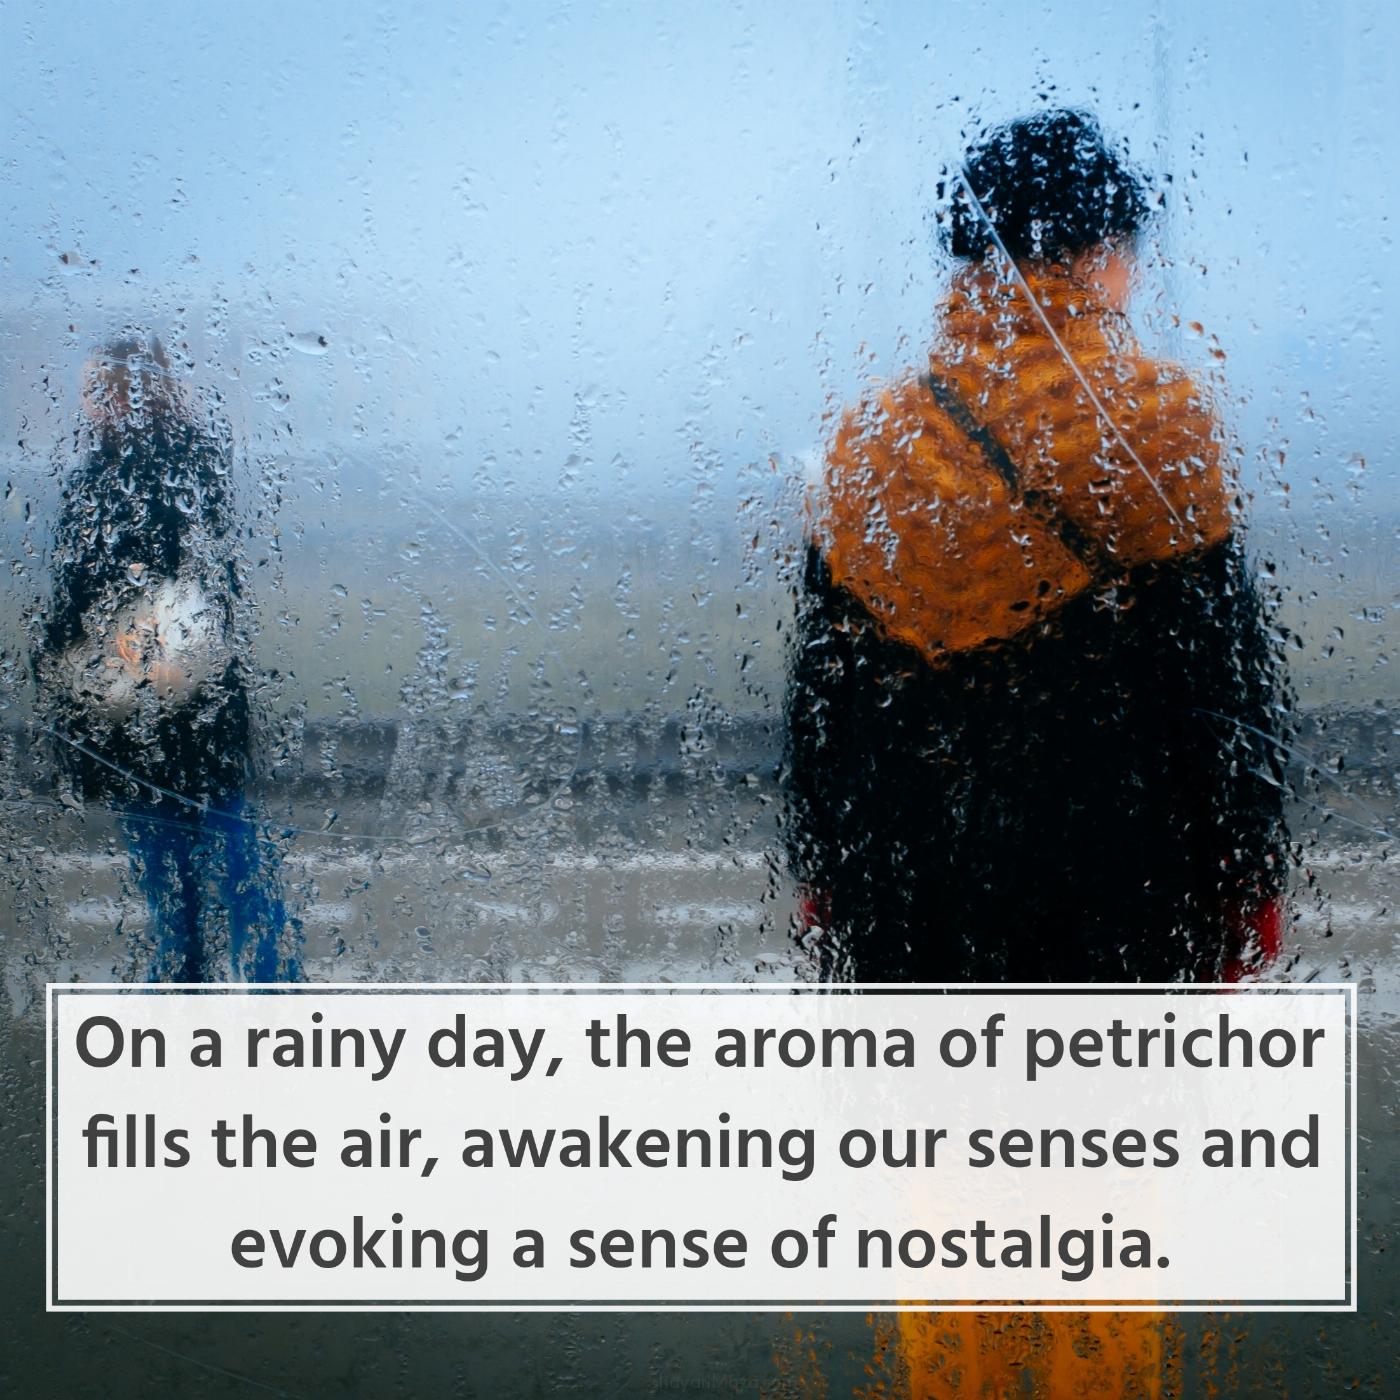 On a rainy day the aroma of petrichor fills the air